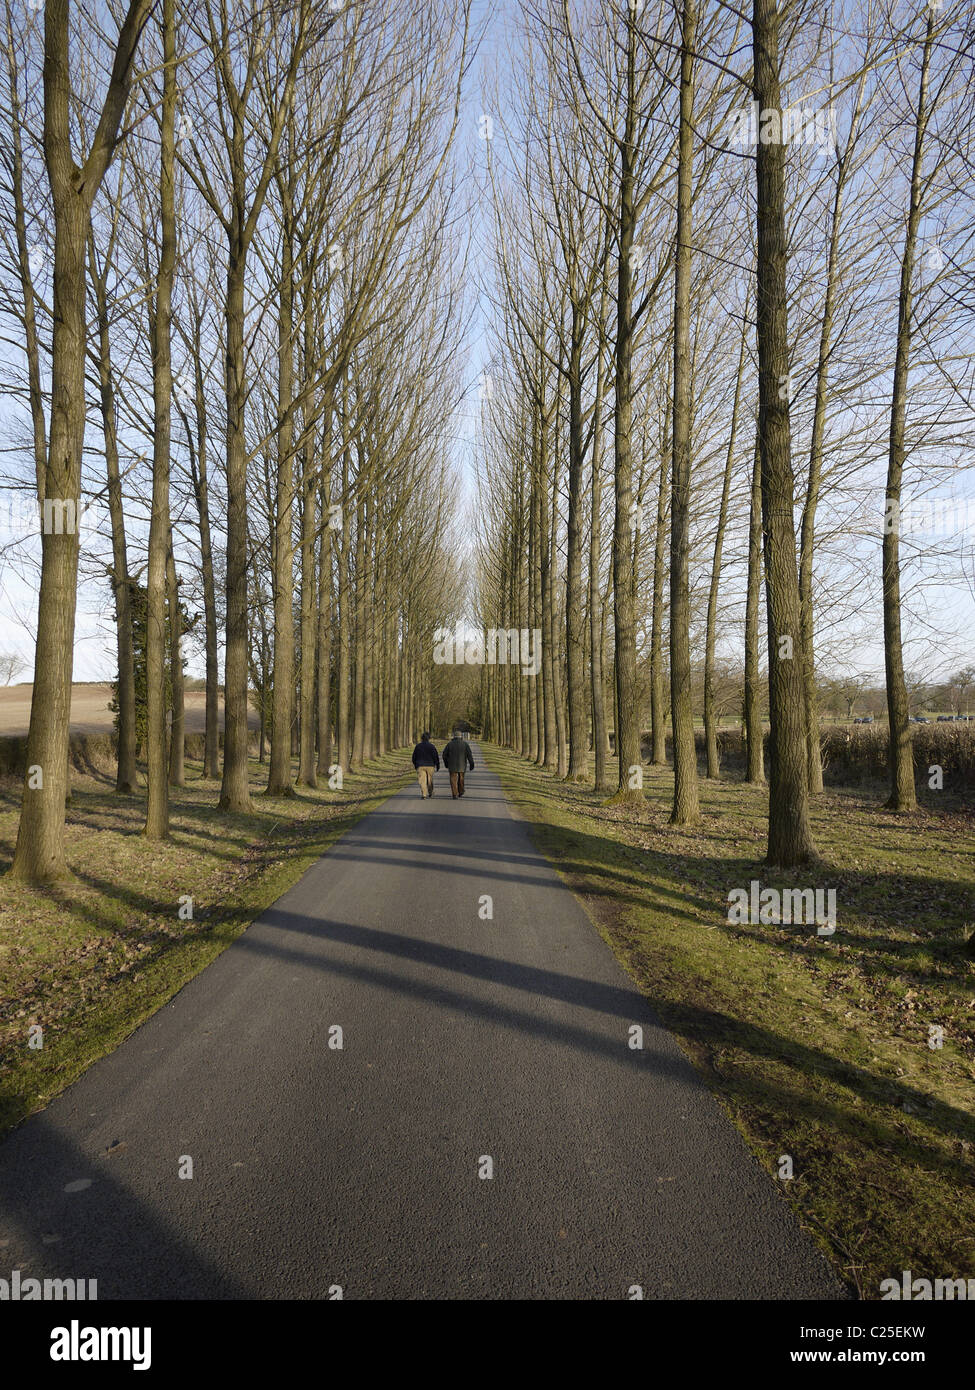 trees avenue road lane country countryside rural estate grounds winter Stock Photo